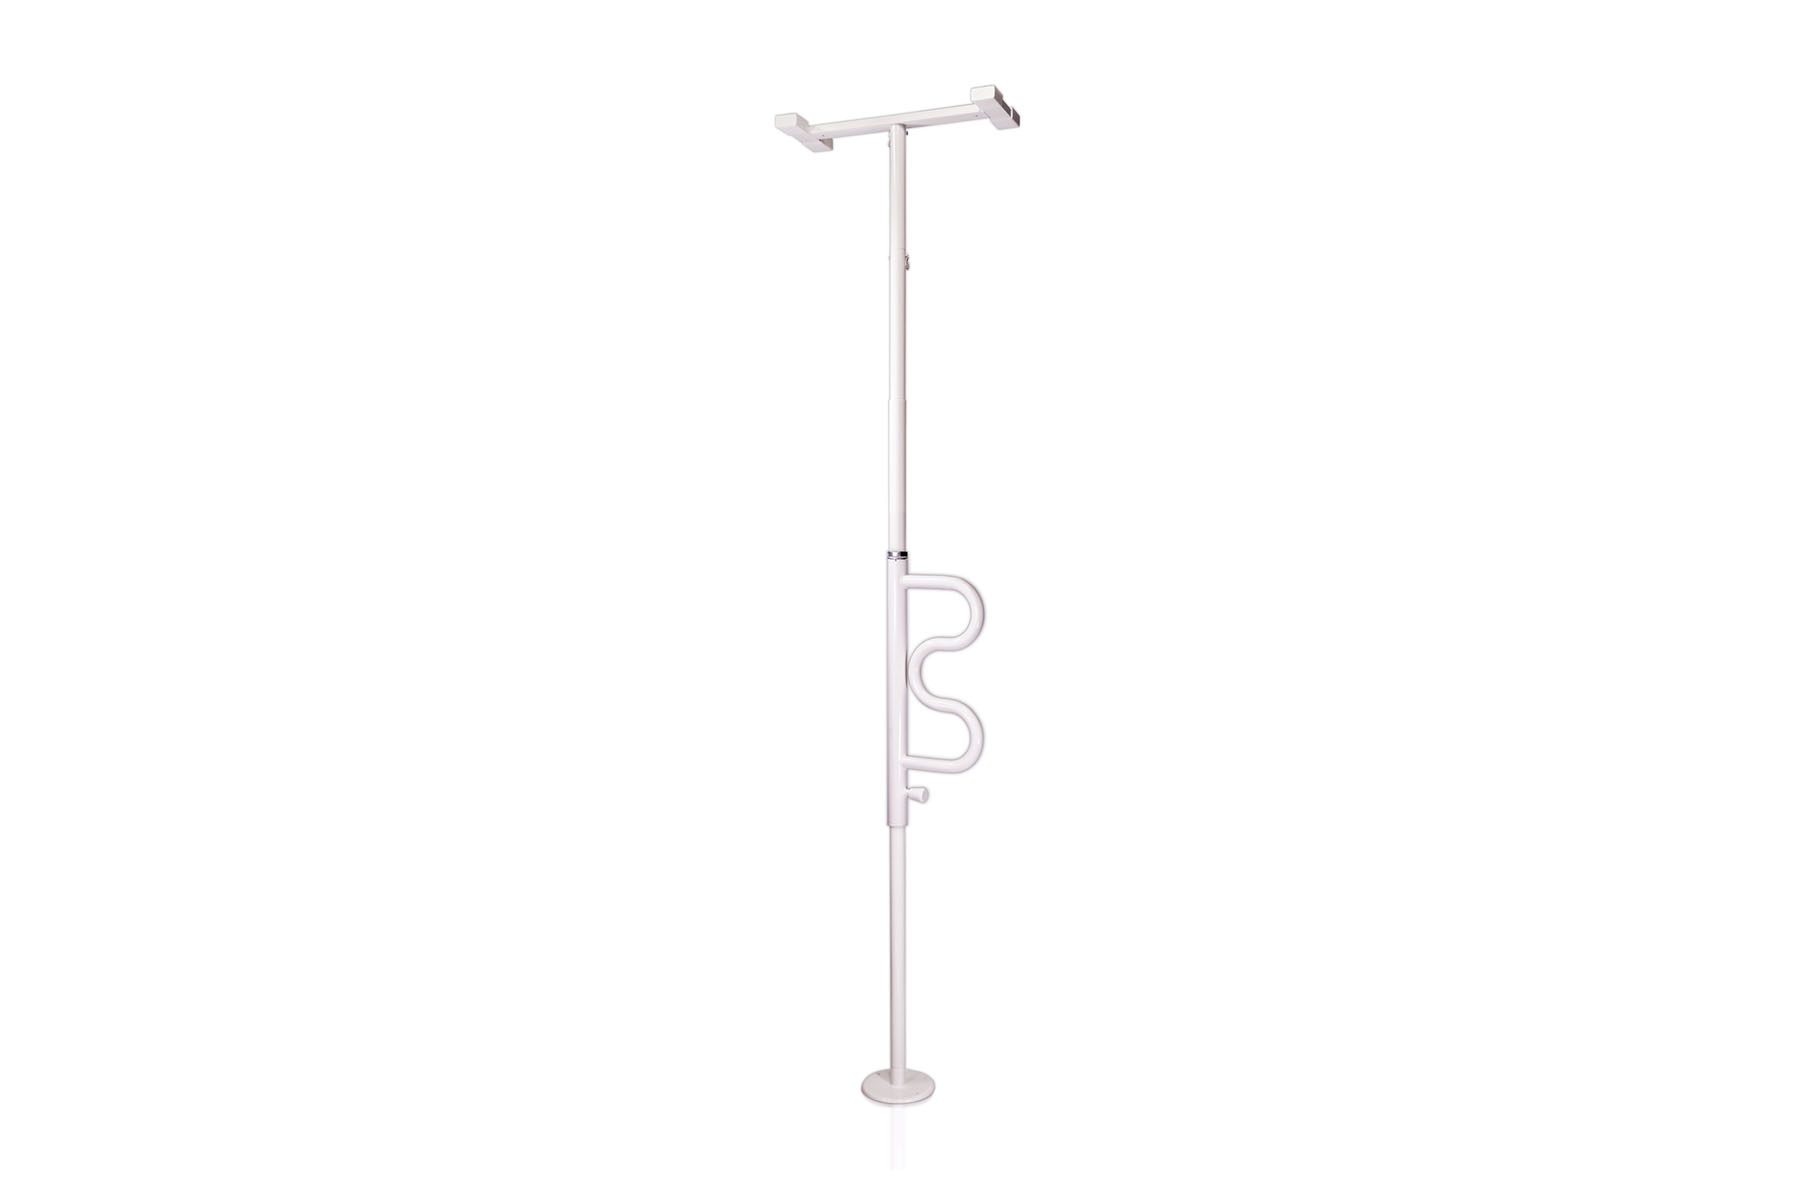 Security Pole and Curve Grab Bar